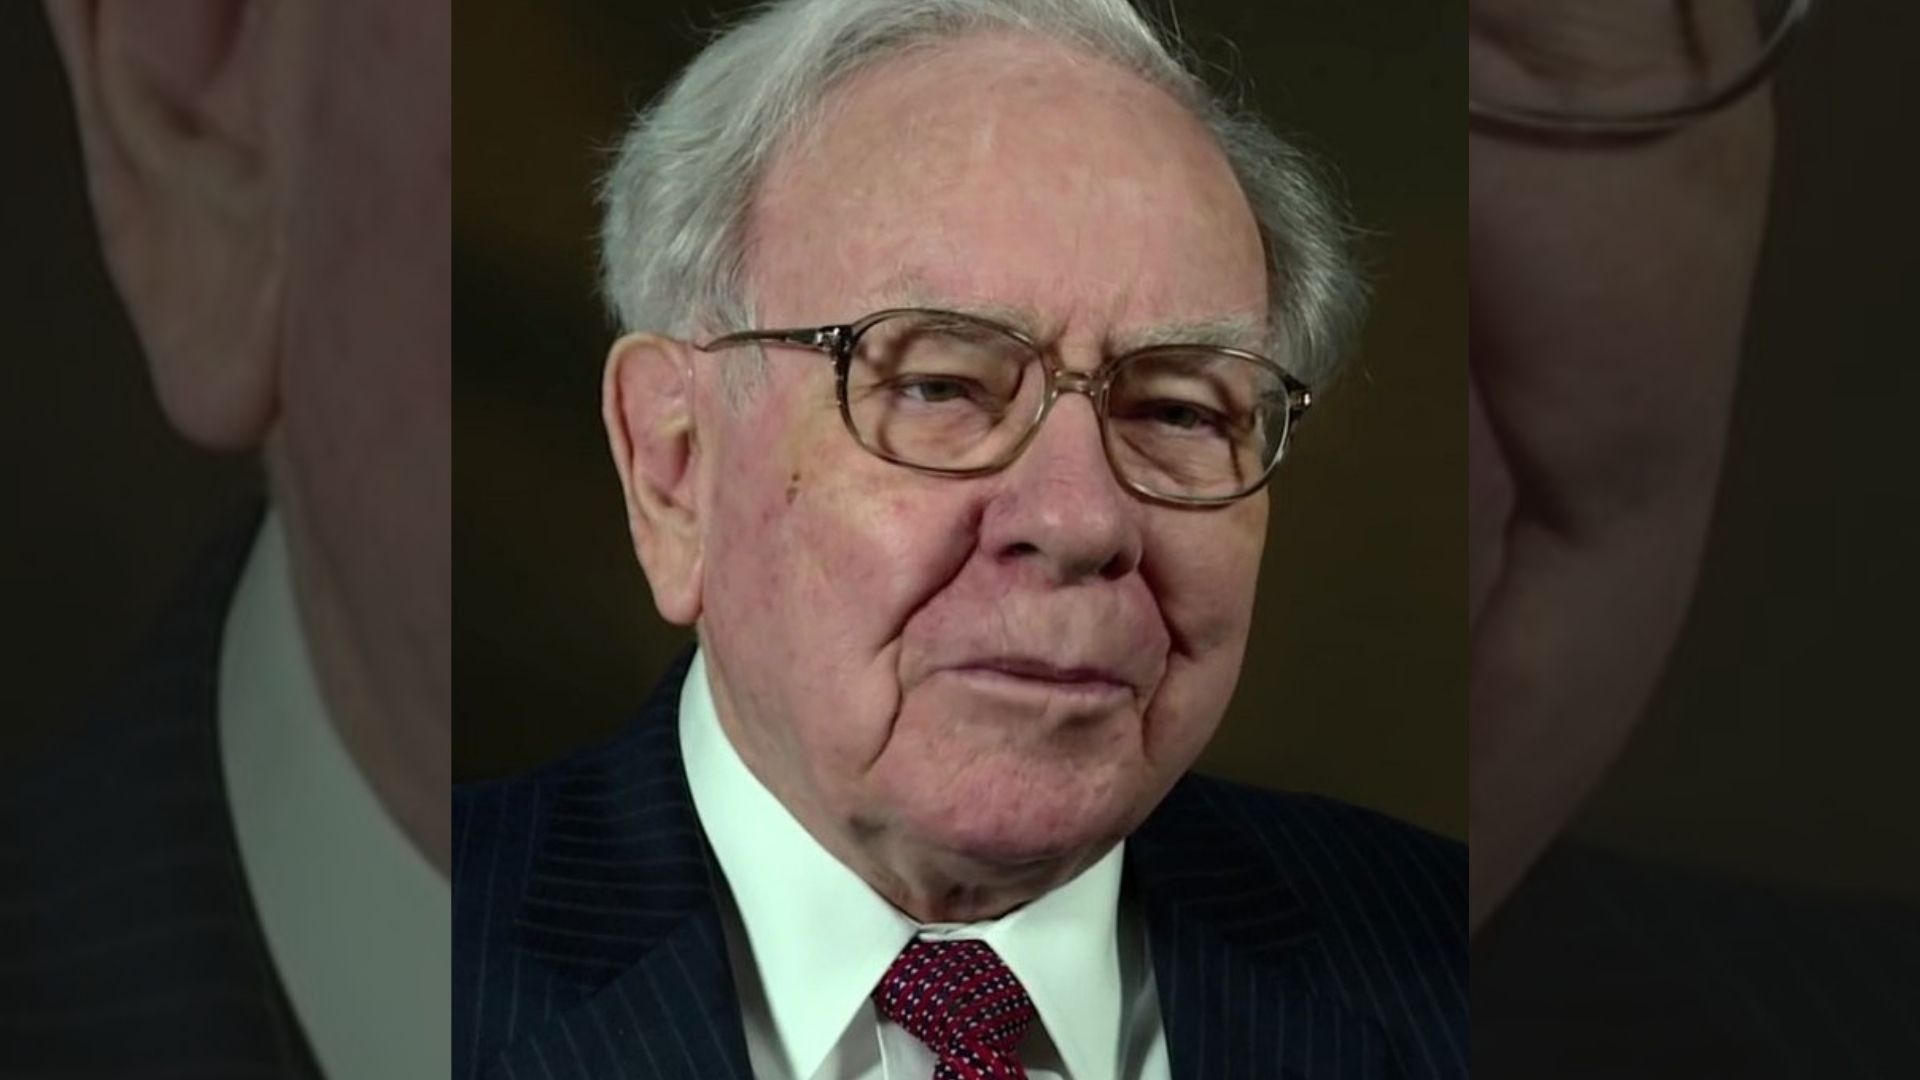 When inflation rises, Warren Buffett recommends these stocks